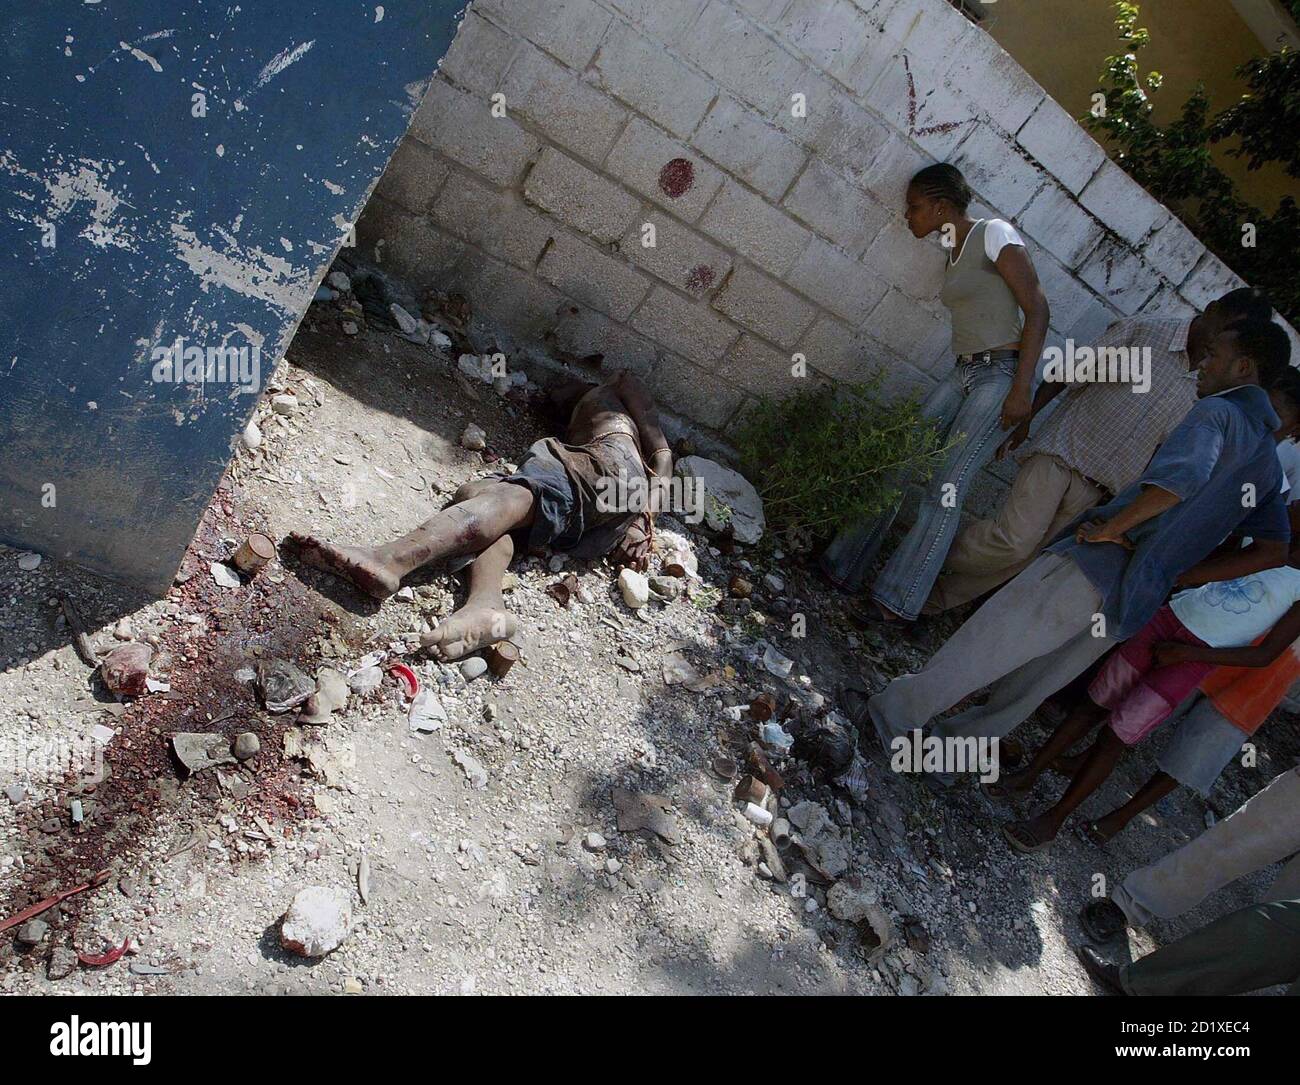 Haitians look at at a body, which has its hands tied up, in the Bel-Air neighborhood of Port-Au-Prince, Haiti September 20, 2005. Two men were stoned and hacked to death in the volatile neighborhood on Tuesday. A resident who said he witnessed the killings, said the victims belonged to armed gangs and were attacked by the neighborhood's residents. REUTERS/Eduardo Munoz Stock Photo